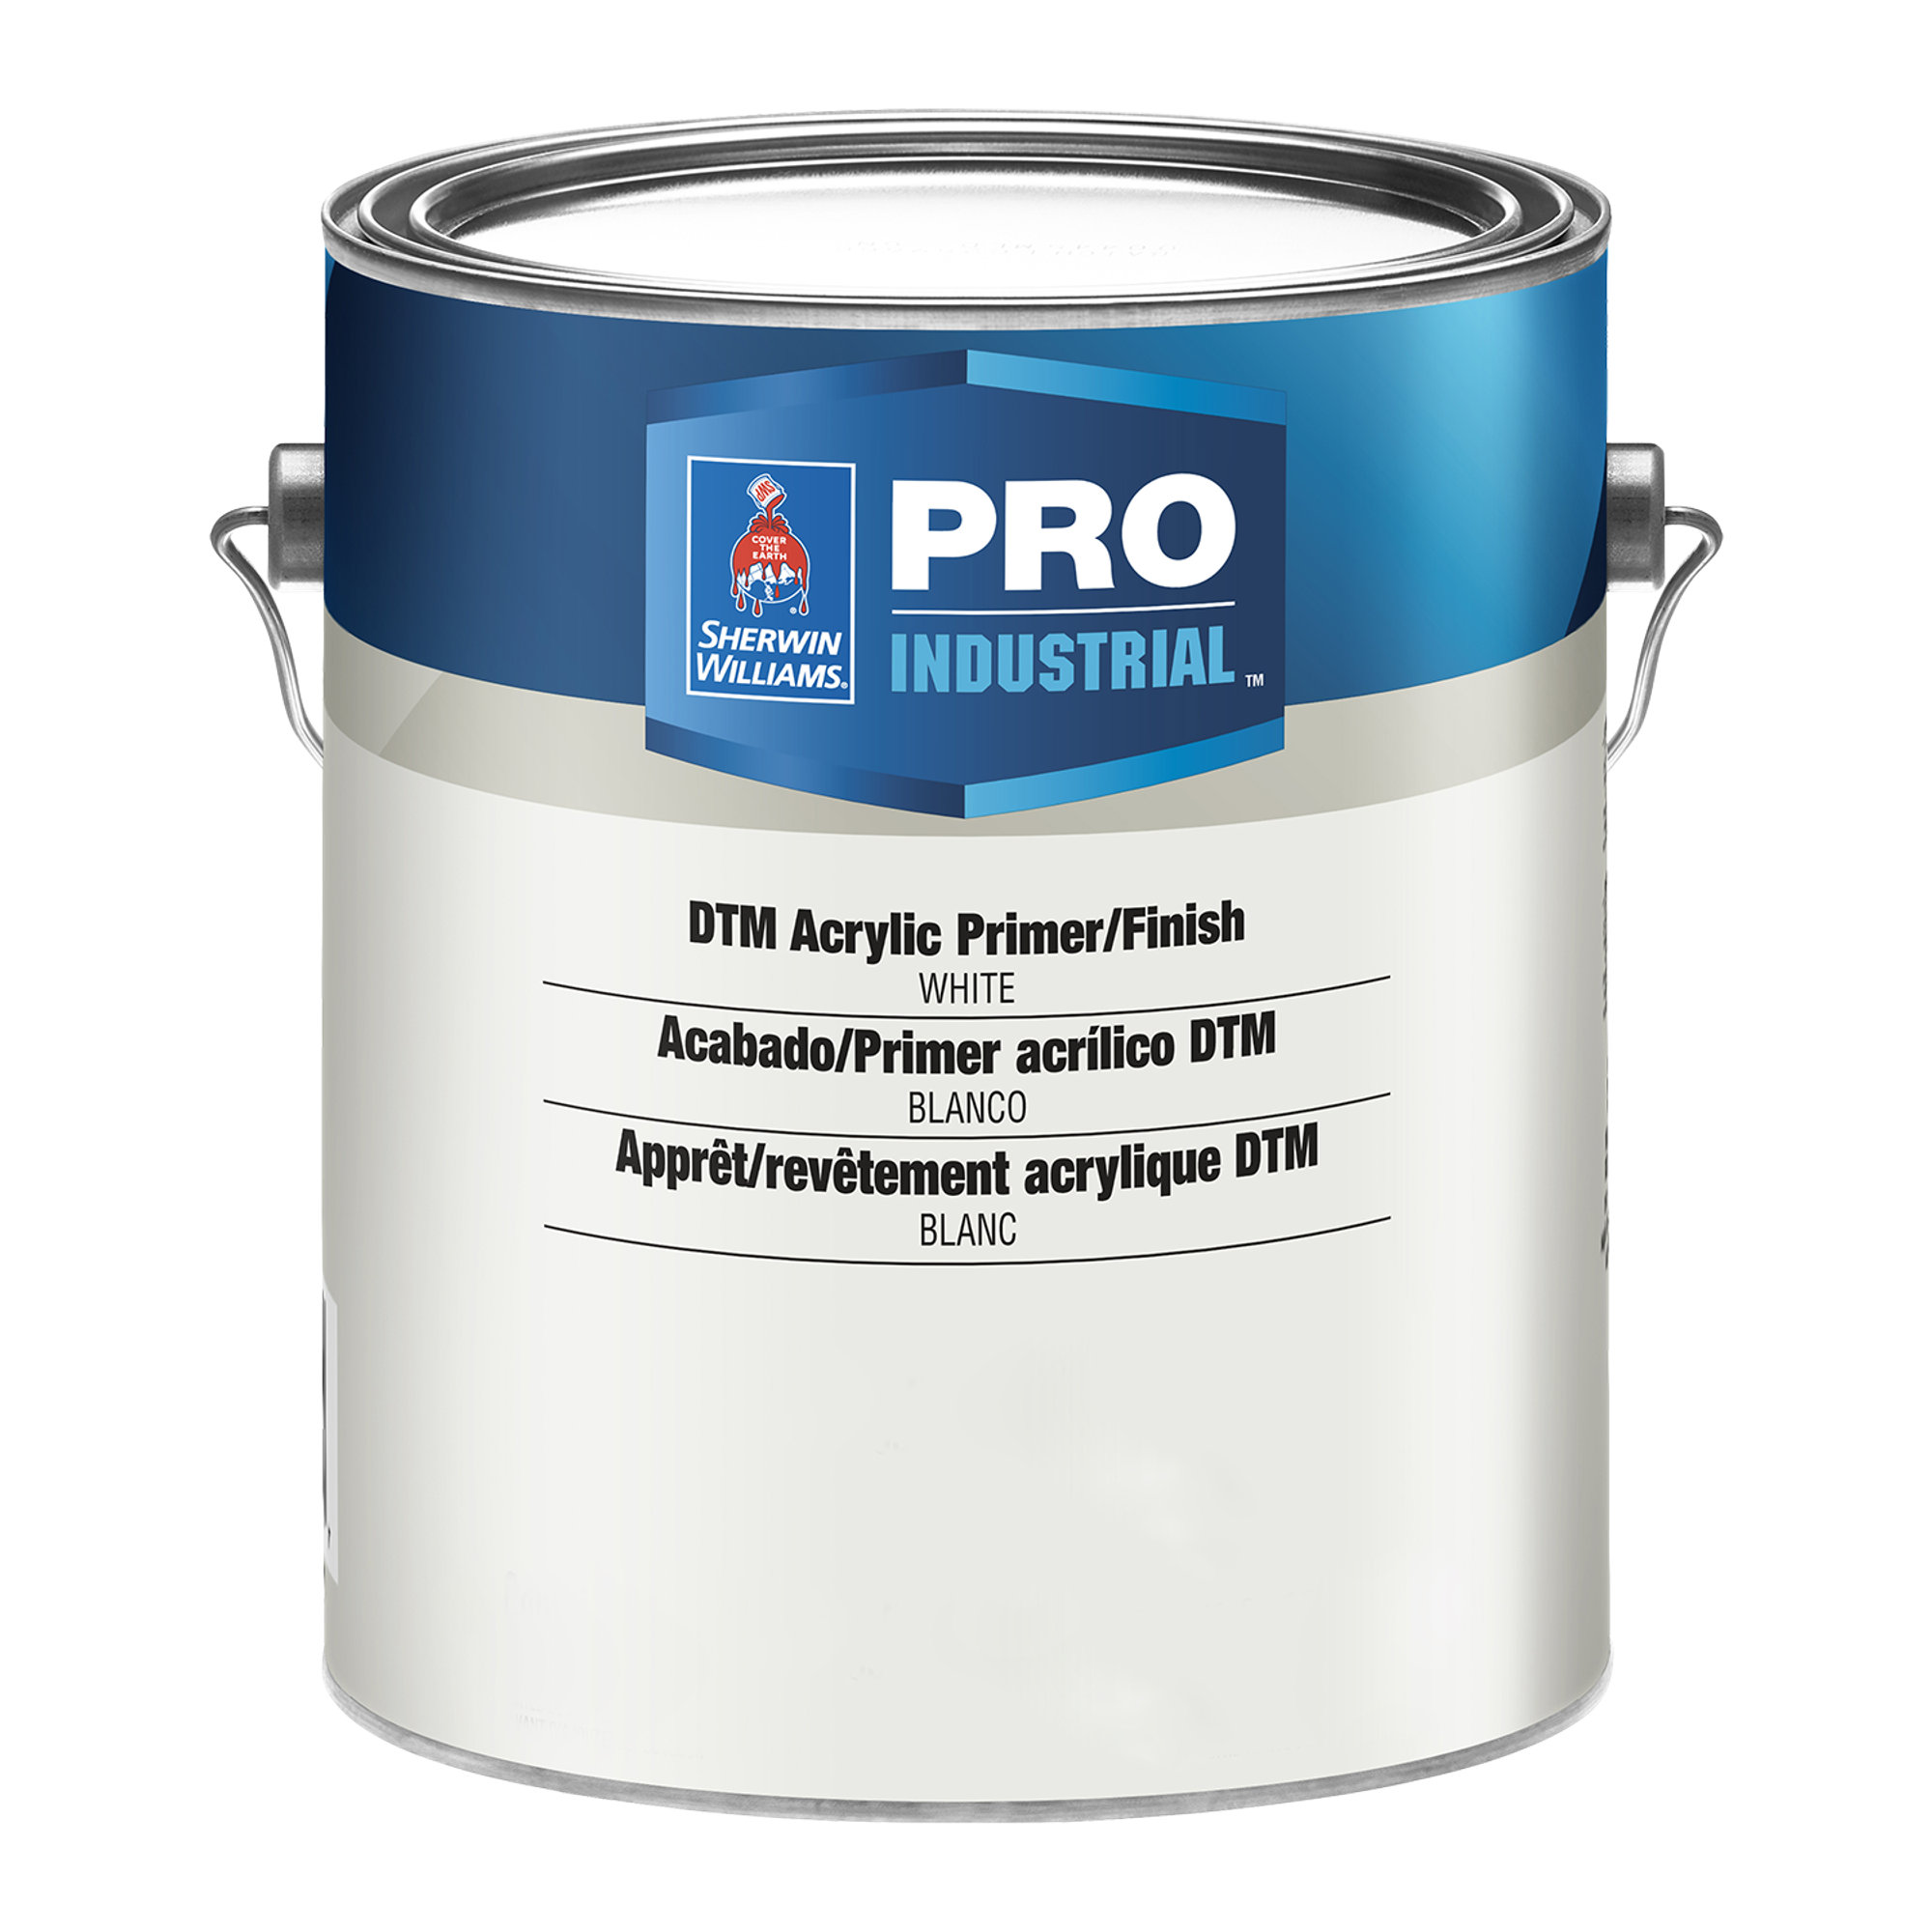 https://s7d2.scene7.com/is/image/sherwinwilliams/650930605-Pro-Industrial-DTM-Acrylic-Primer_Finish-Satin-Off-White-1-Gallon_parent?fit=constrain,1&wid=2000